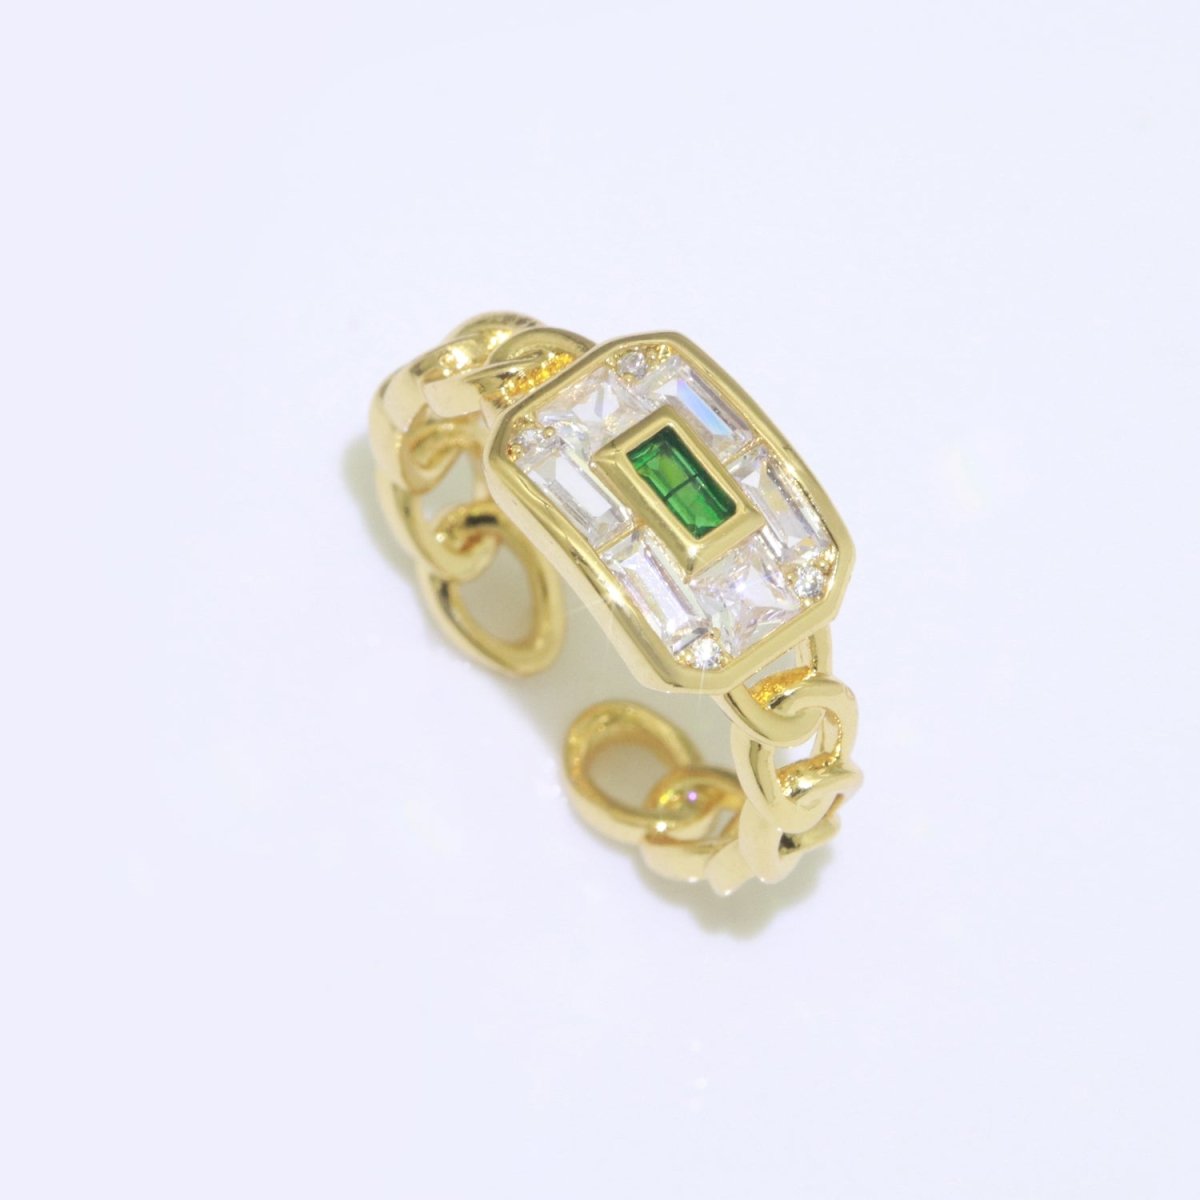 Chain Ring Chunky Curb Chain Ring Statement Gold Stackable Rings Cocktail Ring Blue, Pink, Green Cz Stone S-135 ~ S-137 - DLUXCA